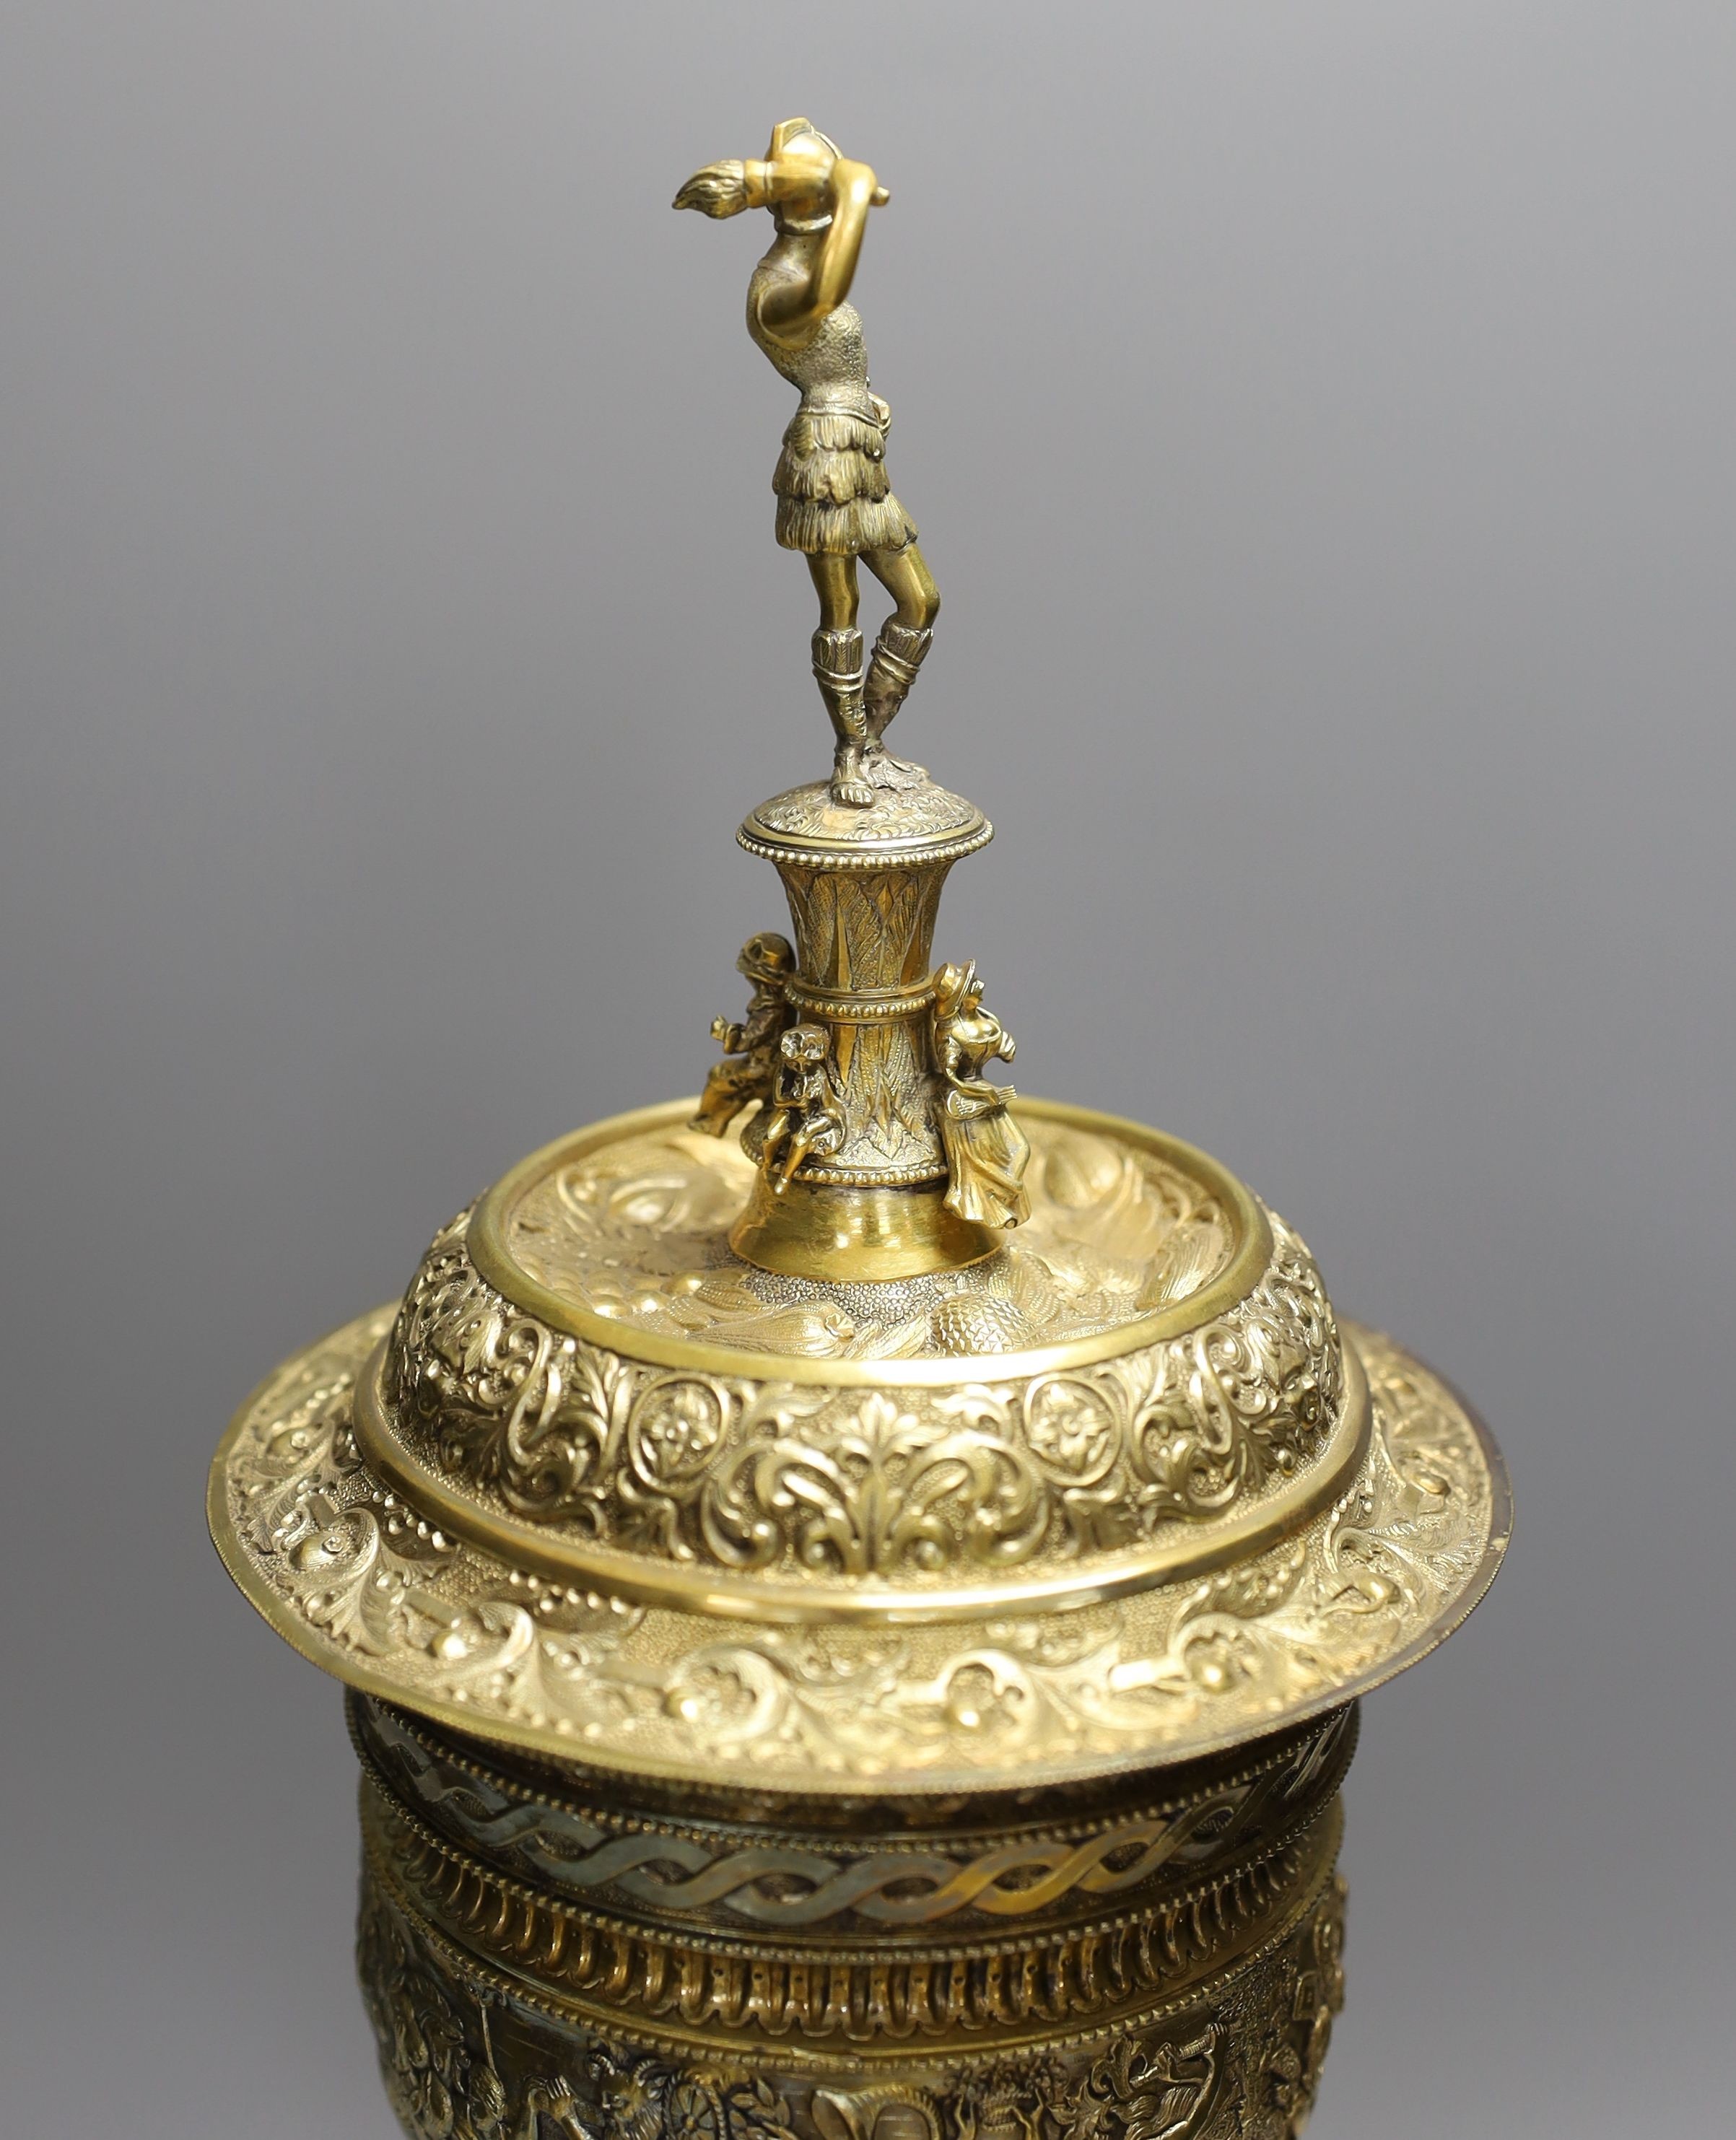 A decorative Bacchus electrotype chalice and cover on stone base - 49cm high - Image 7 of 7